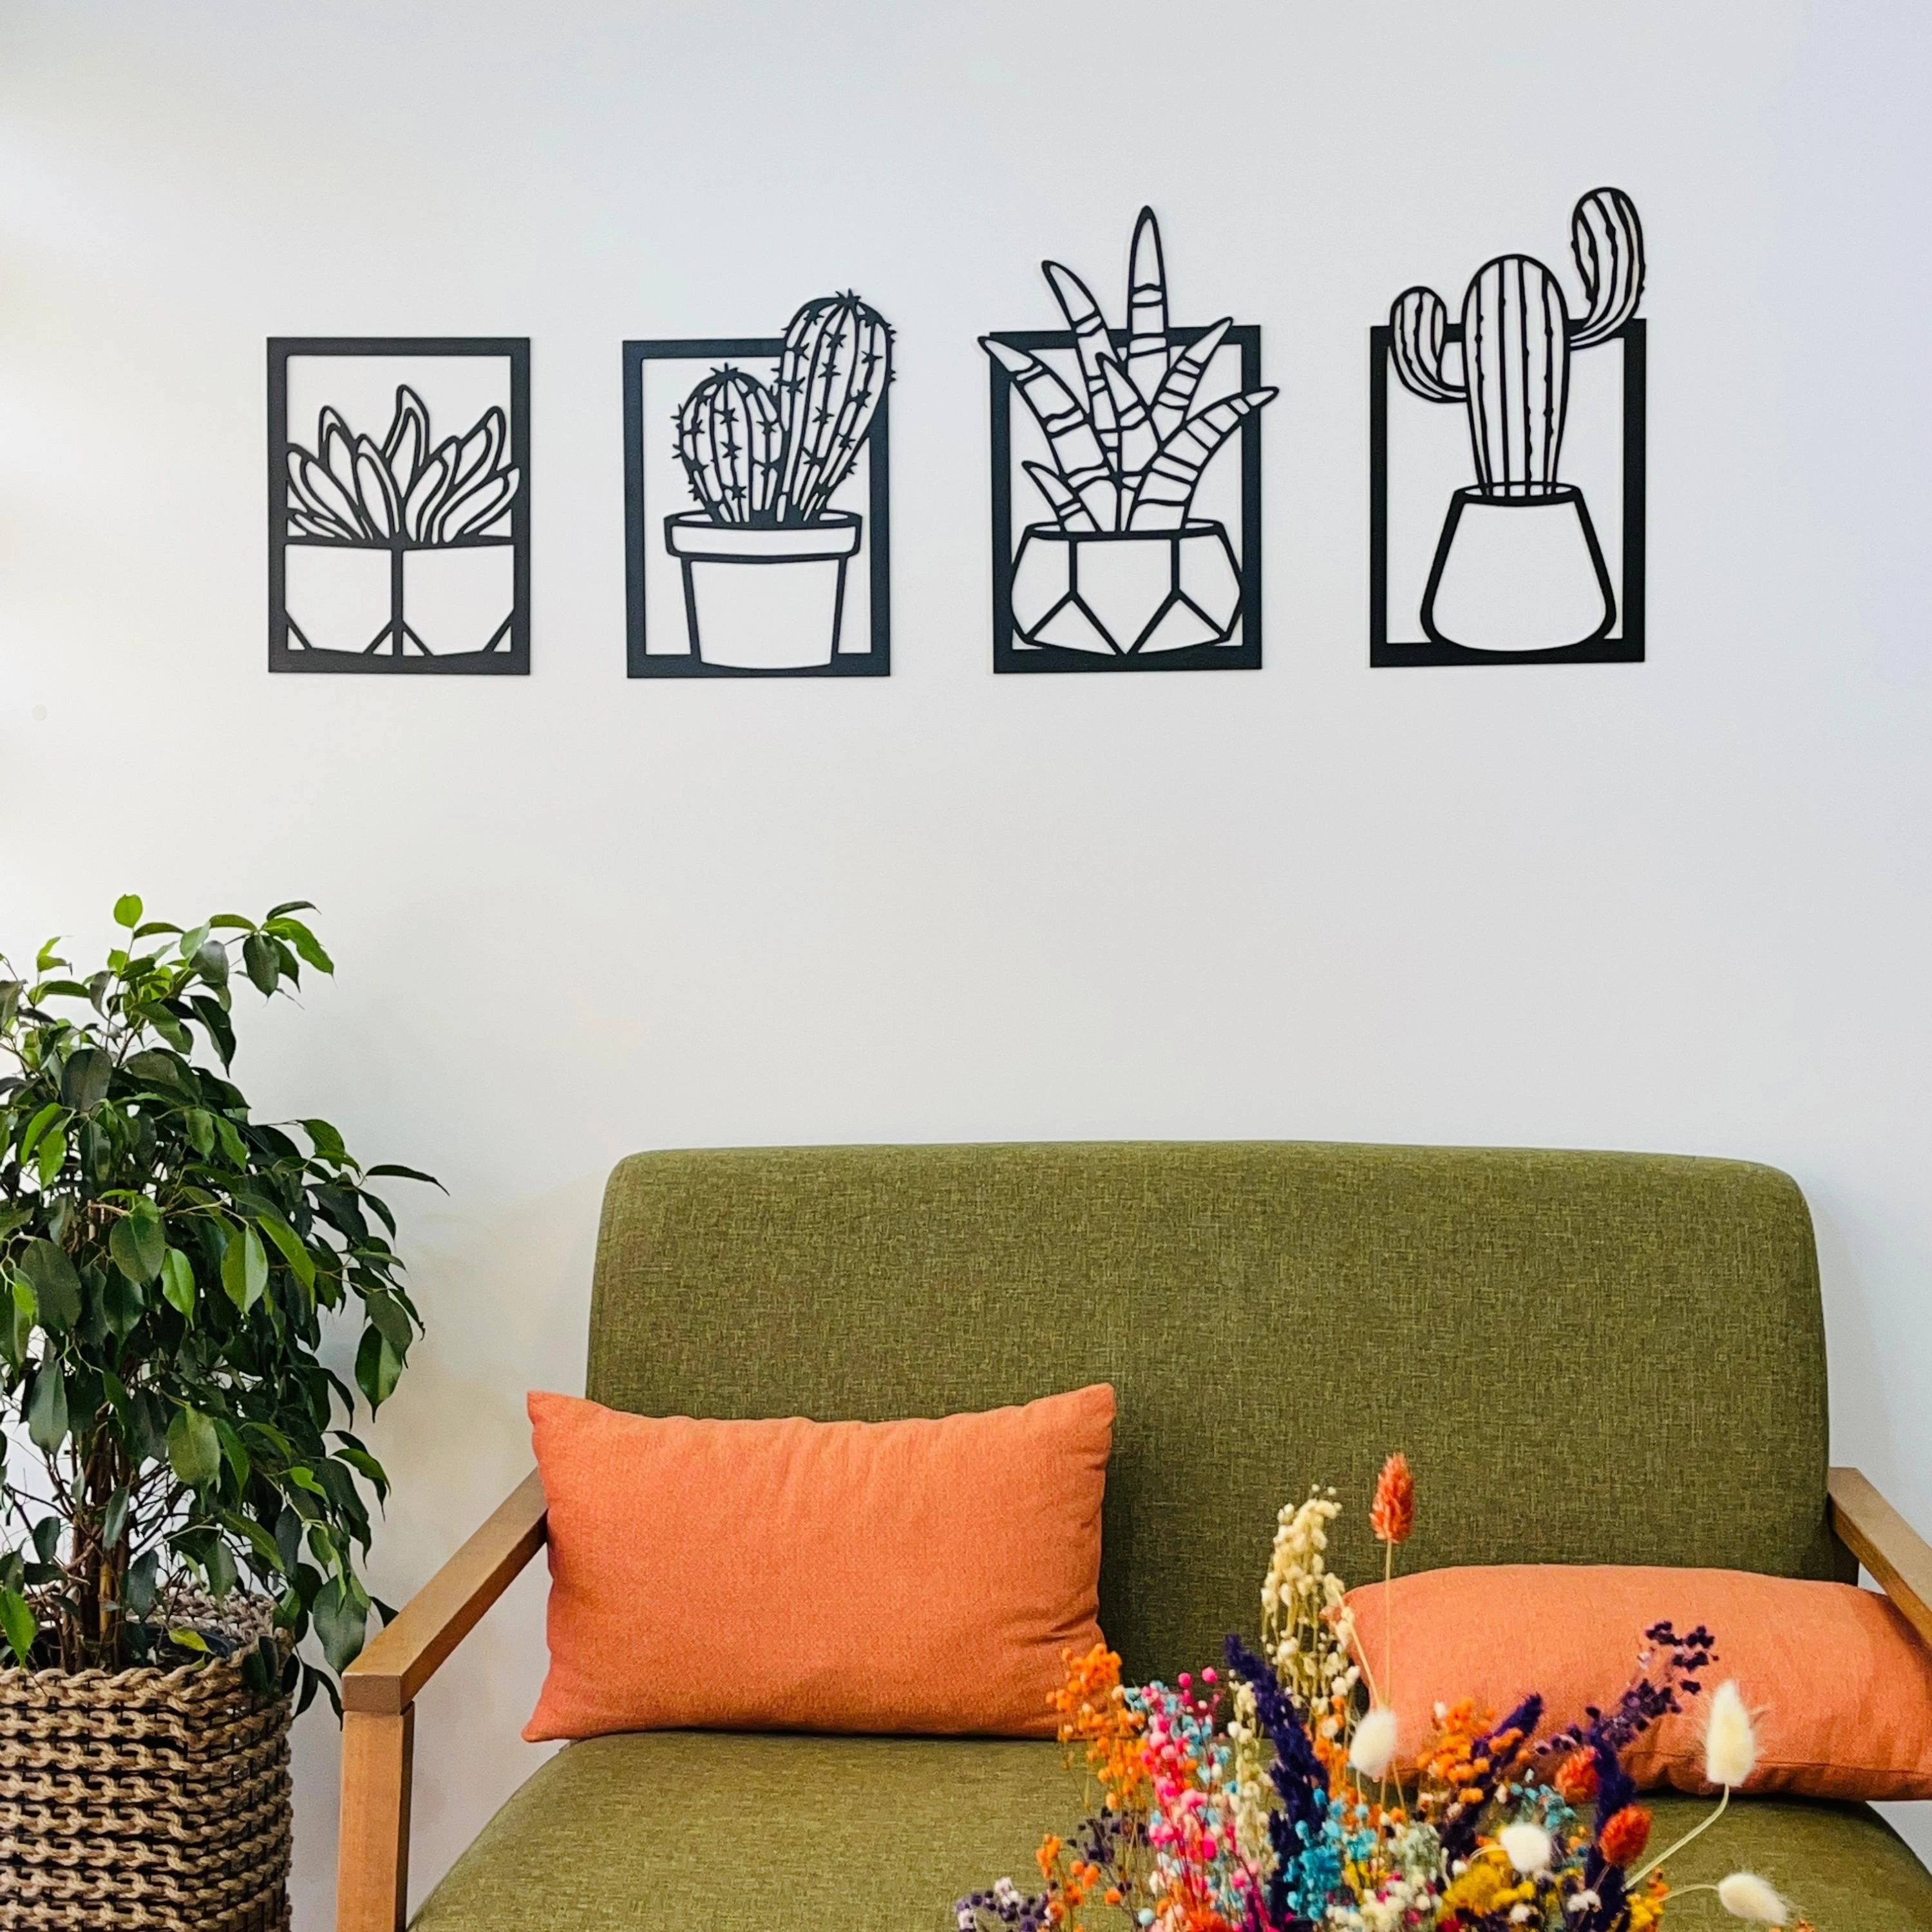 Wooden Wall Art Decor Cactus Flower Vase Black Color Modern Nature Desert Home Office New 3D Creative Stylish Living Room Bedroom Kitchen Decorative 2021 Quality Gift Ideas Ornament Painting Classic Beautiful Cute